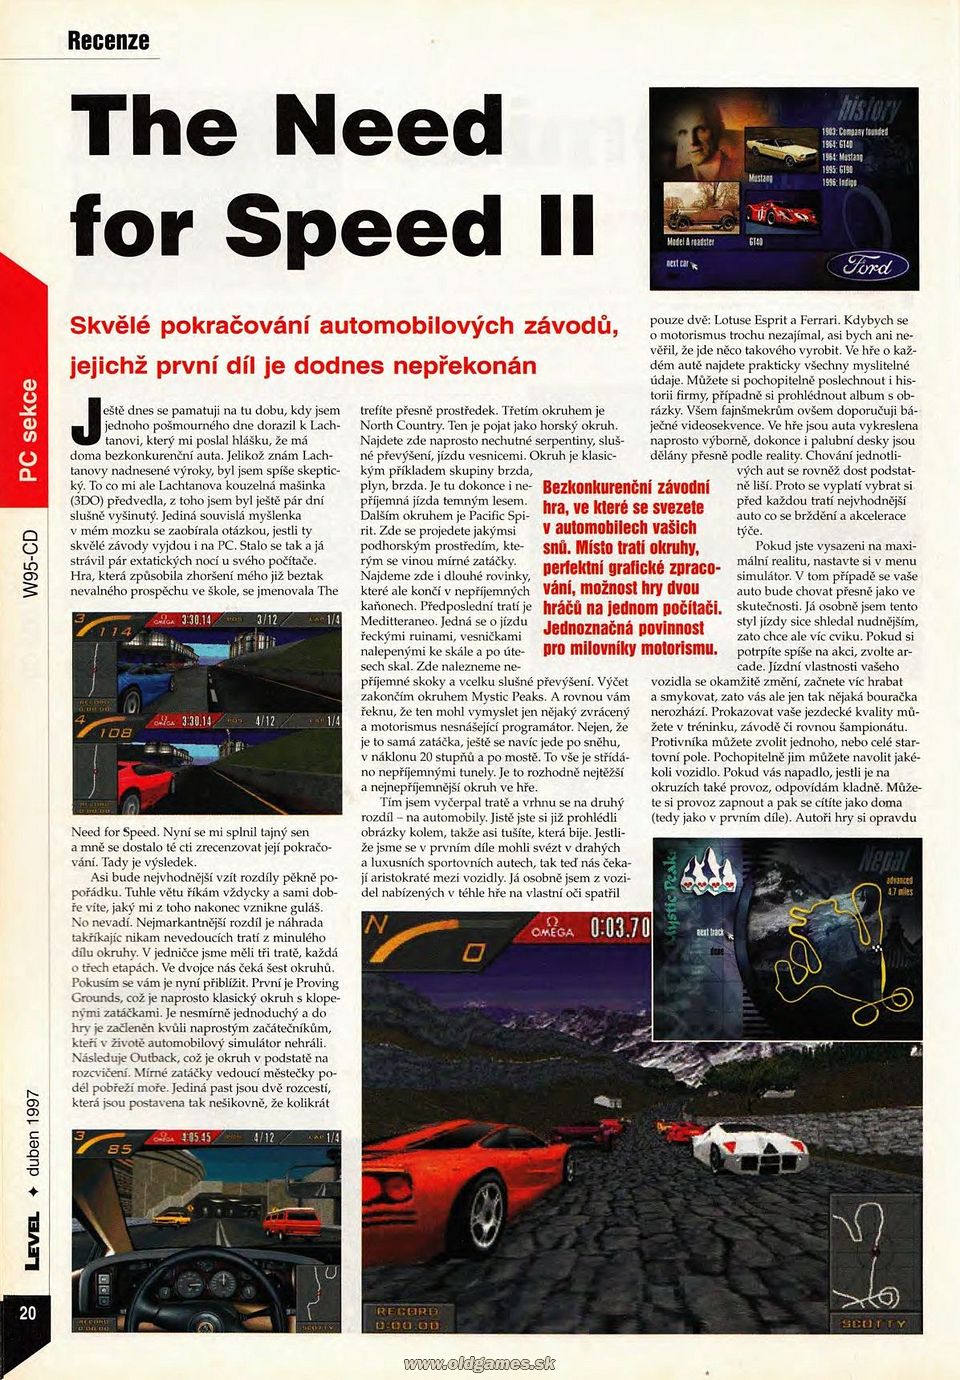 The Need for Speed II